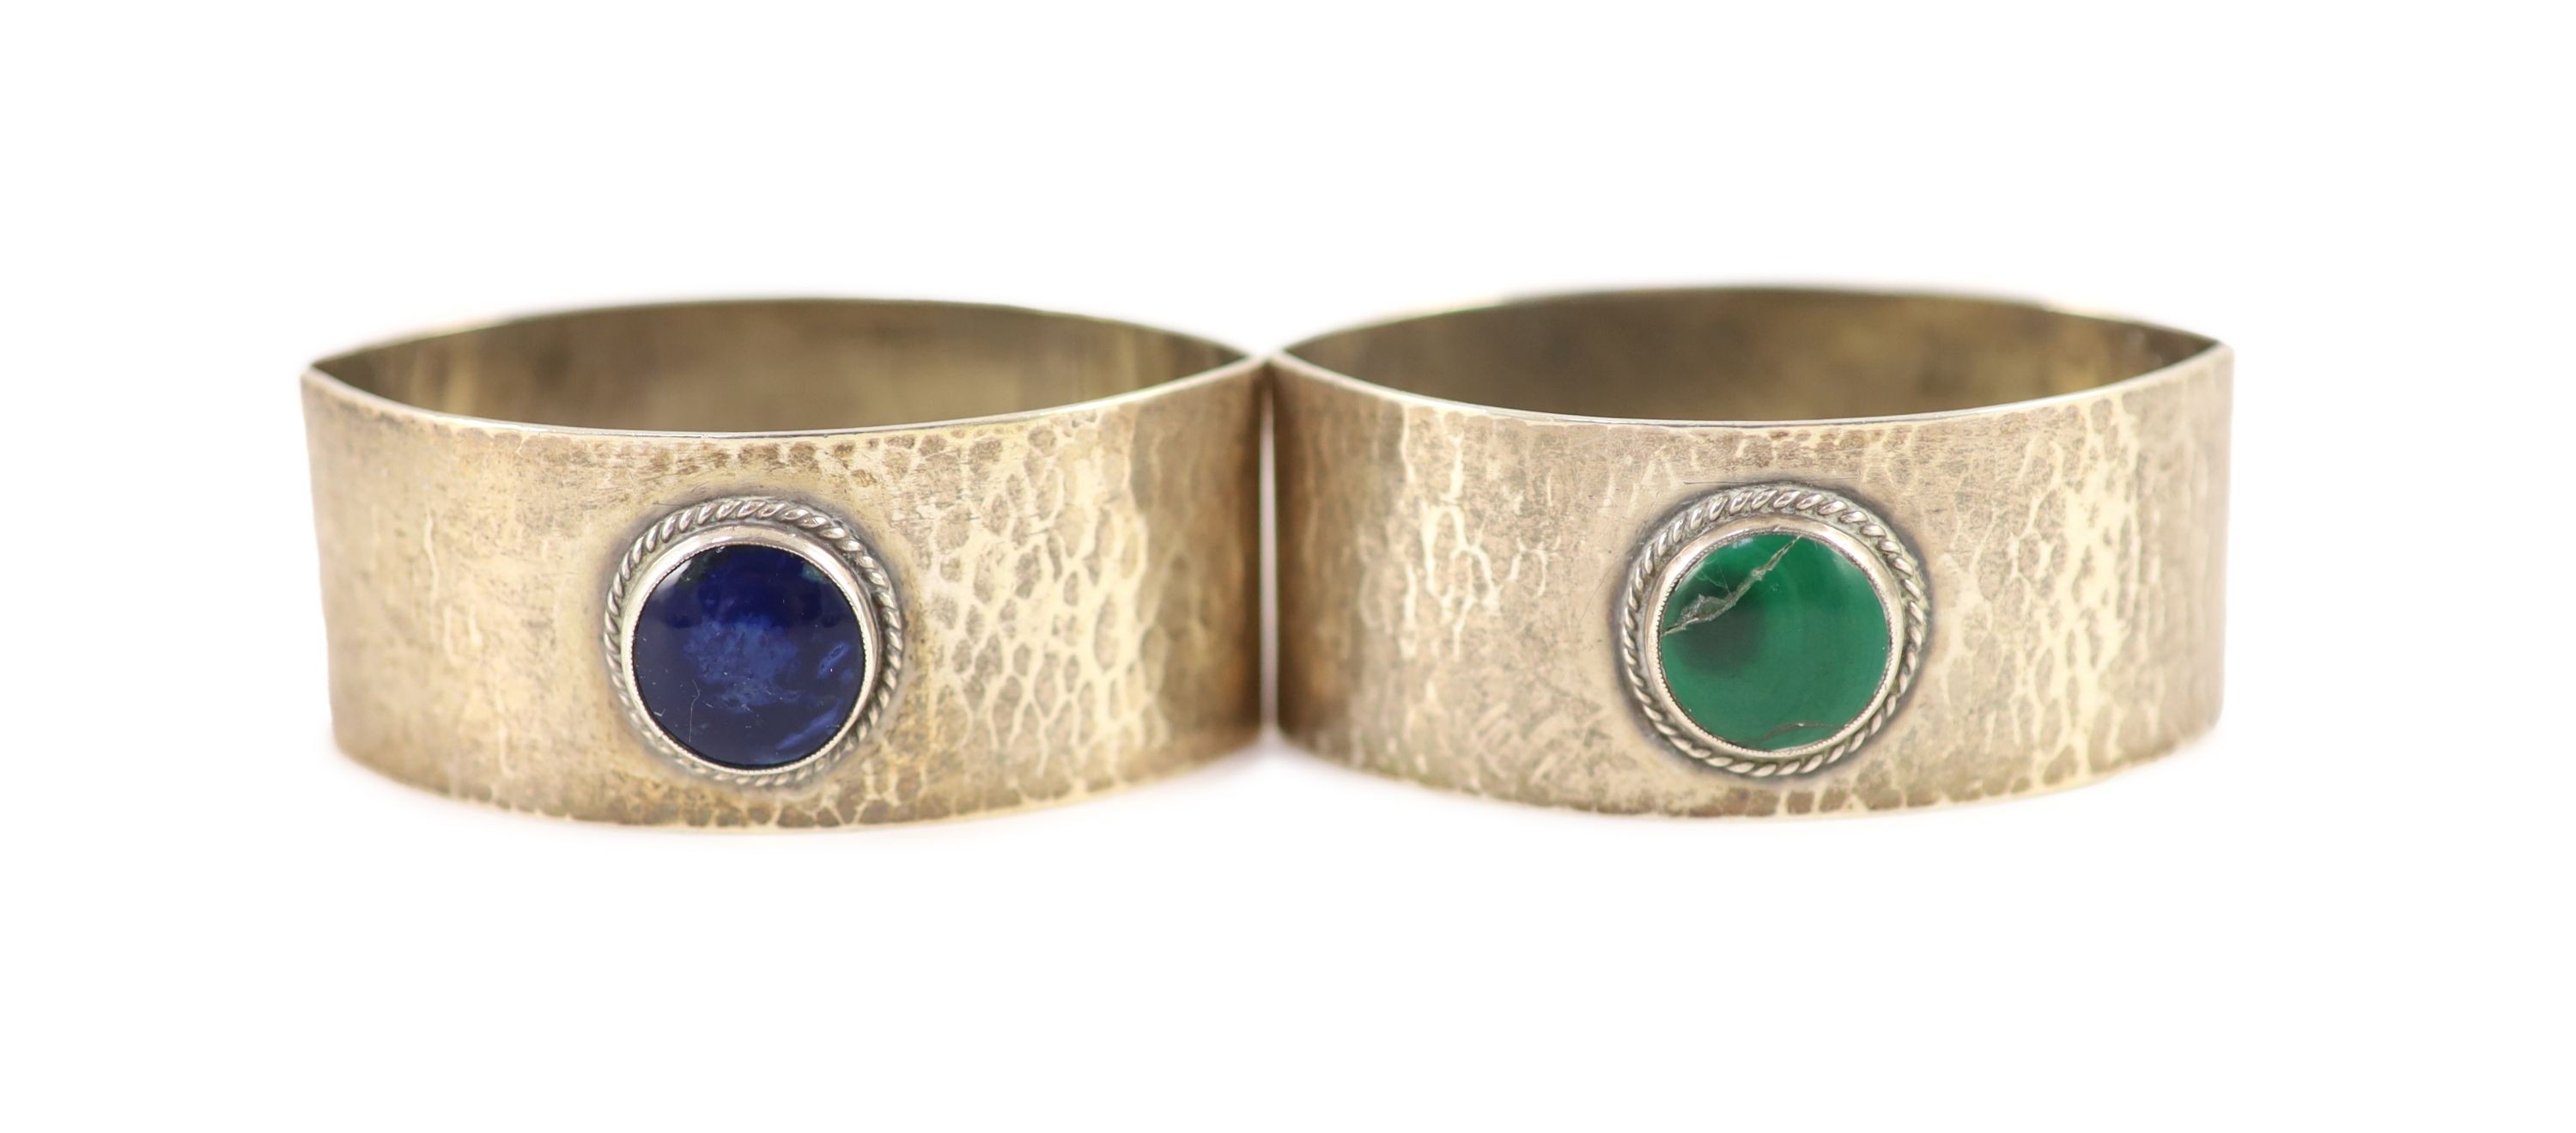 A pair of 1930's Liberty & Co planished silver navette shaped napkin rings, with inset cabochon stone